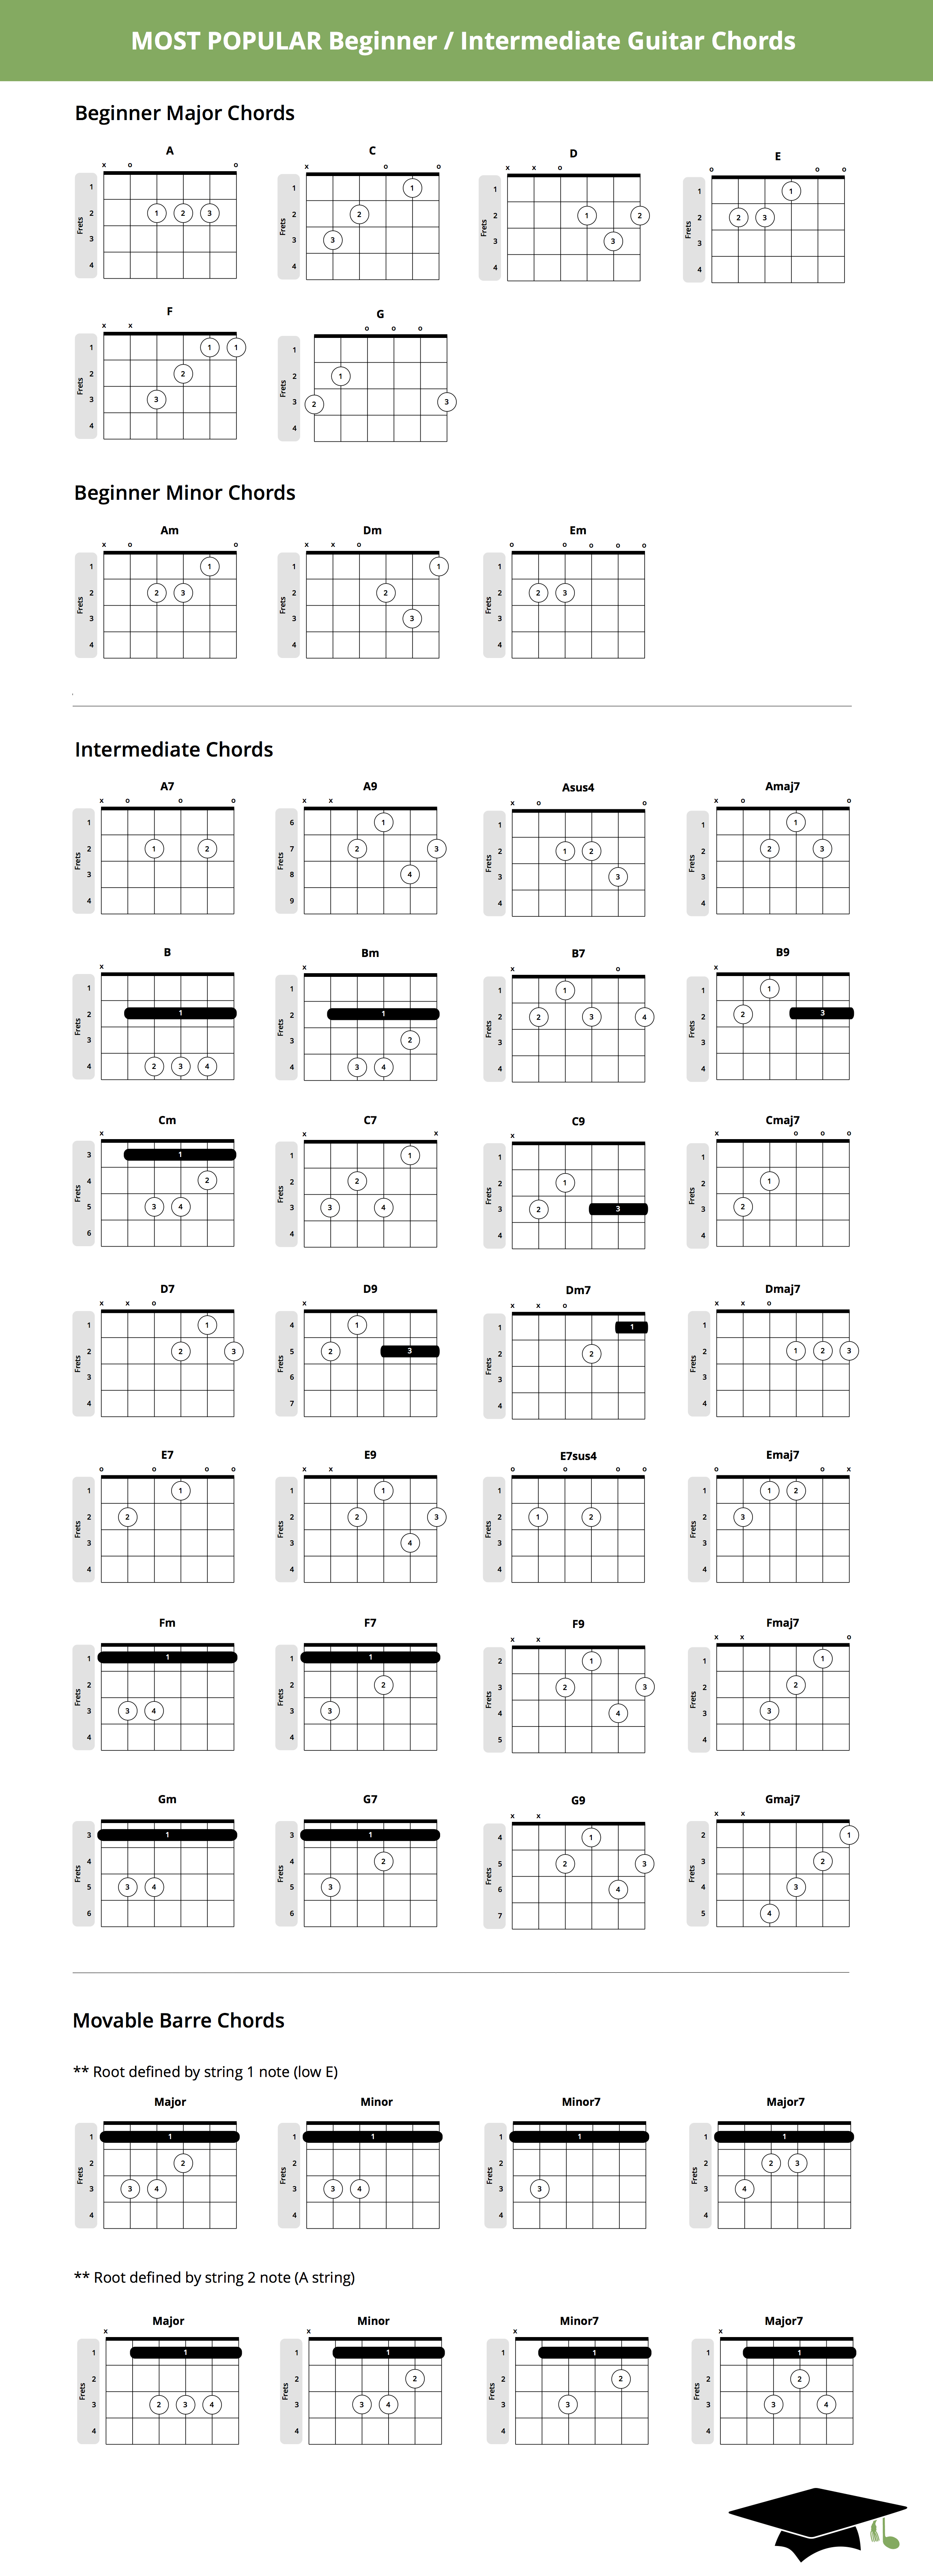 Even So Come Chords Most Popular Beginner Guitar Chords Chart Musician Tuts